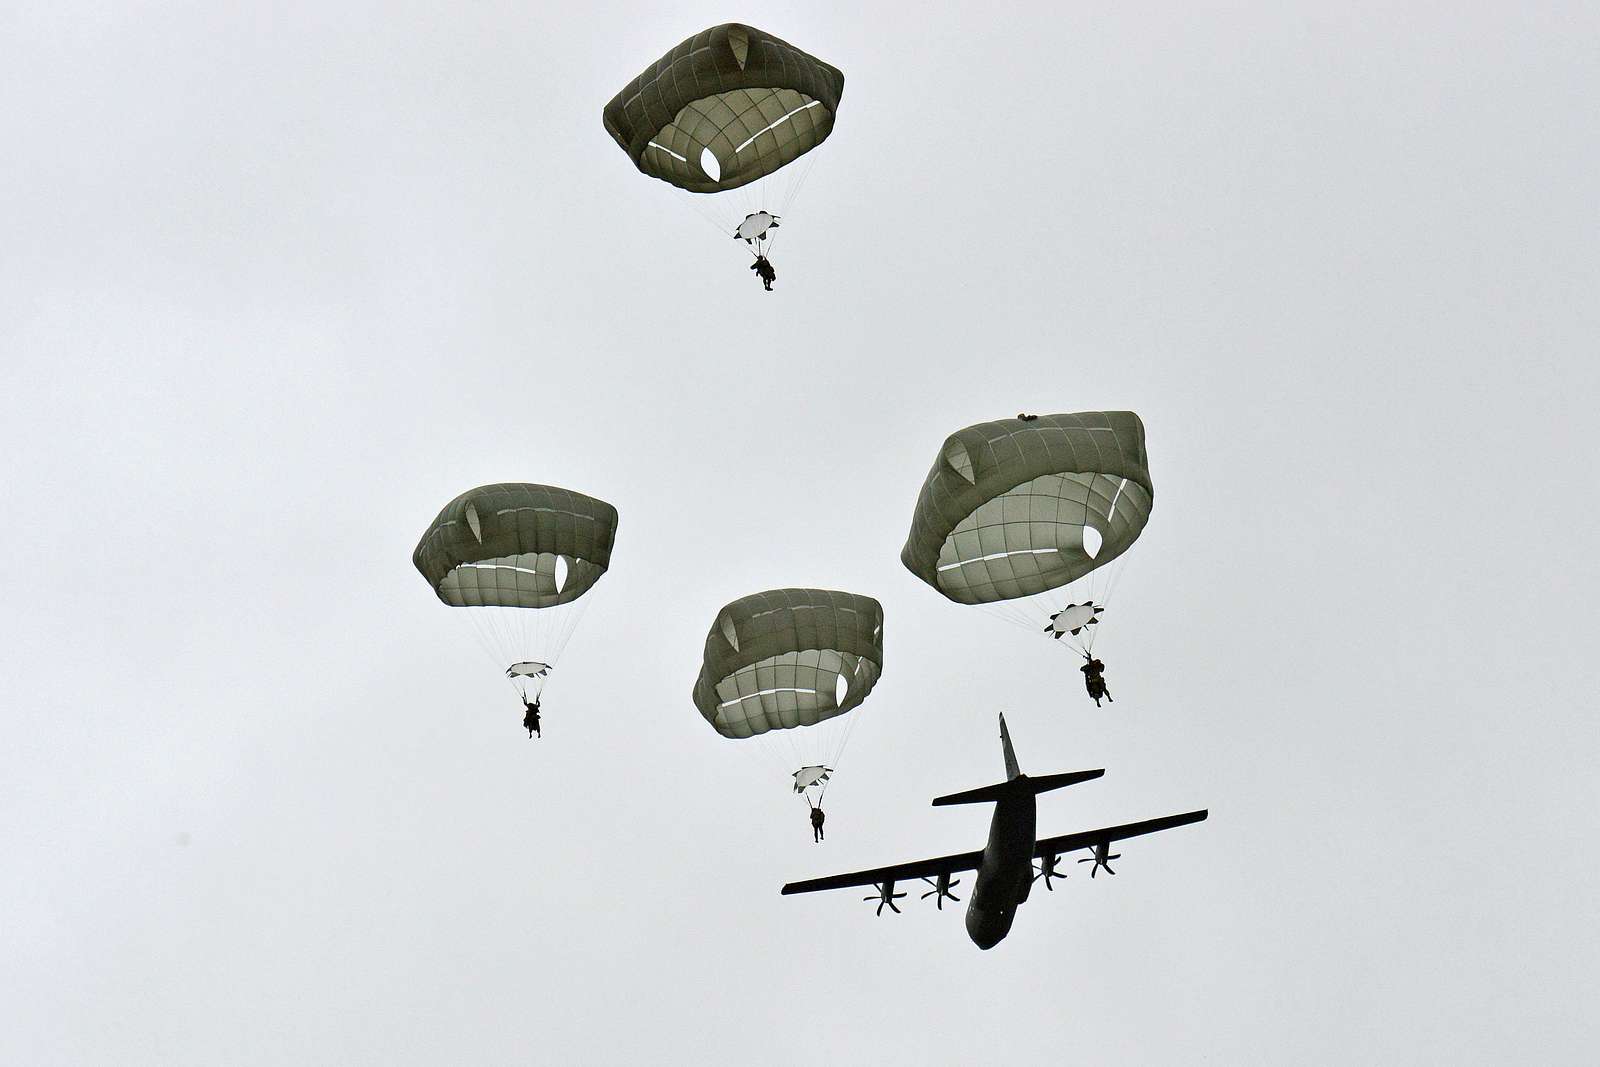 The tail of the US Air Force C-17 Globemaster reaches to the stormy sky as  paratroopers from the 173rd Airborne Brigade board the aircraft to conduct  a parachute assault onto Juliet Drop